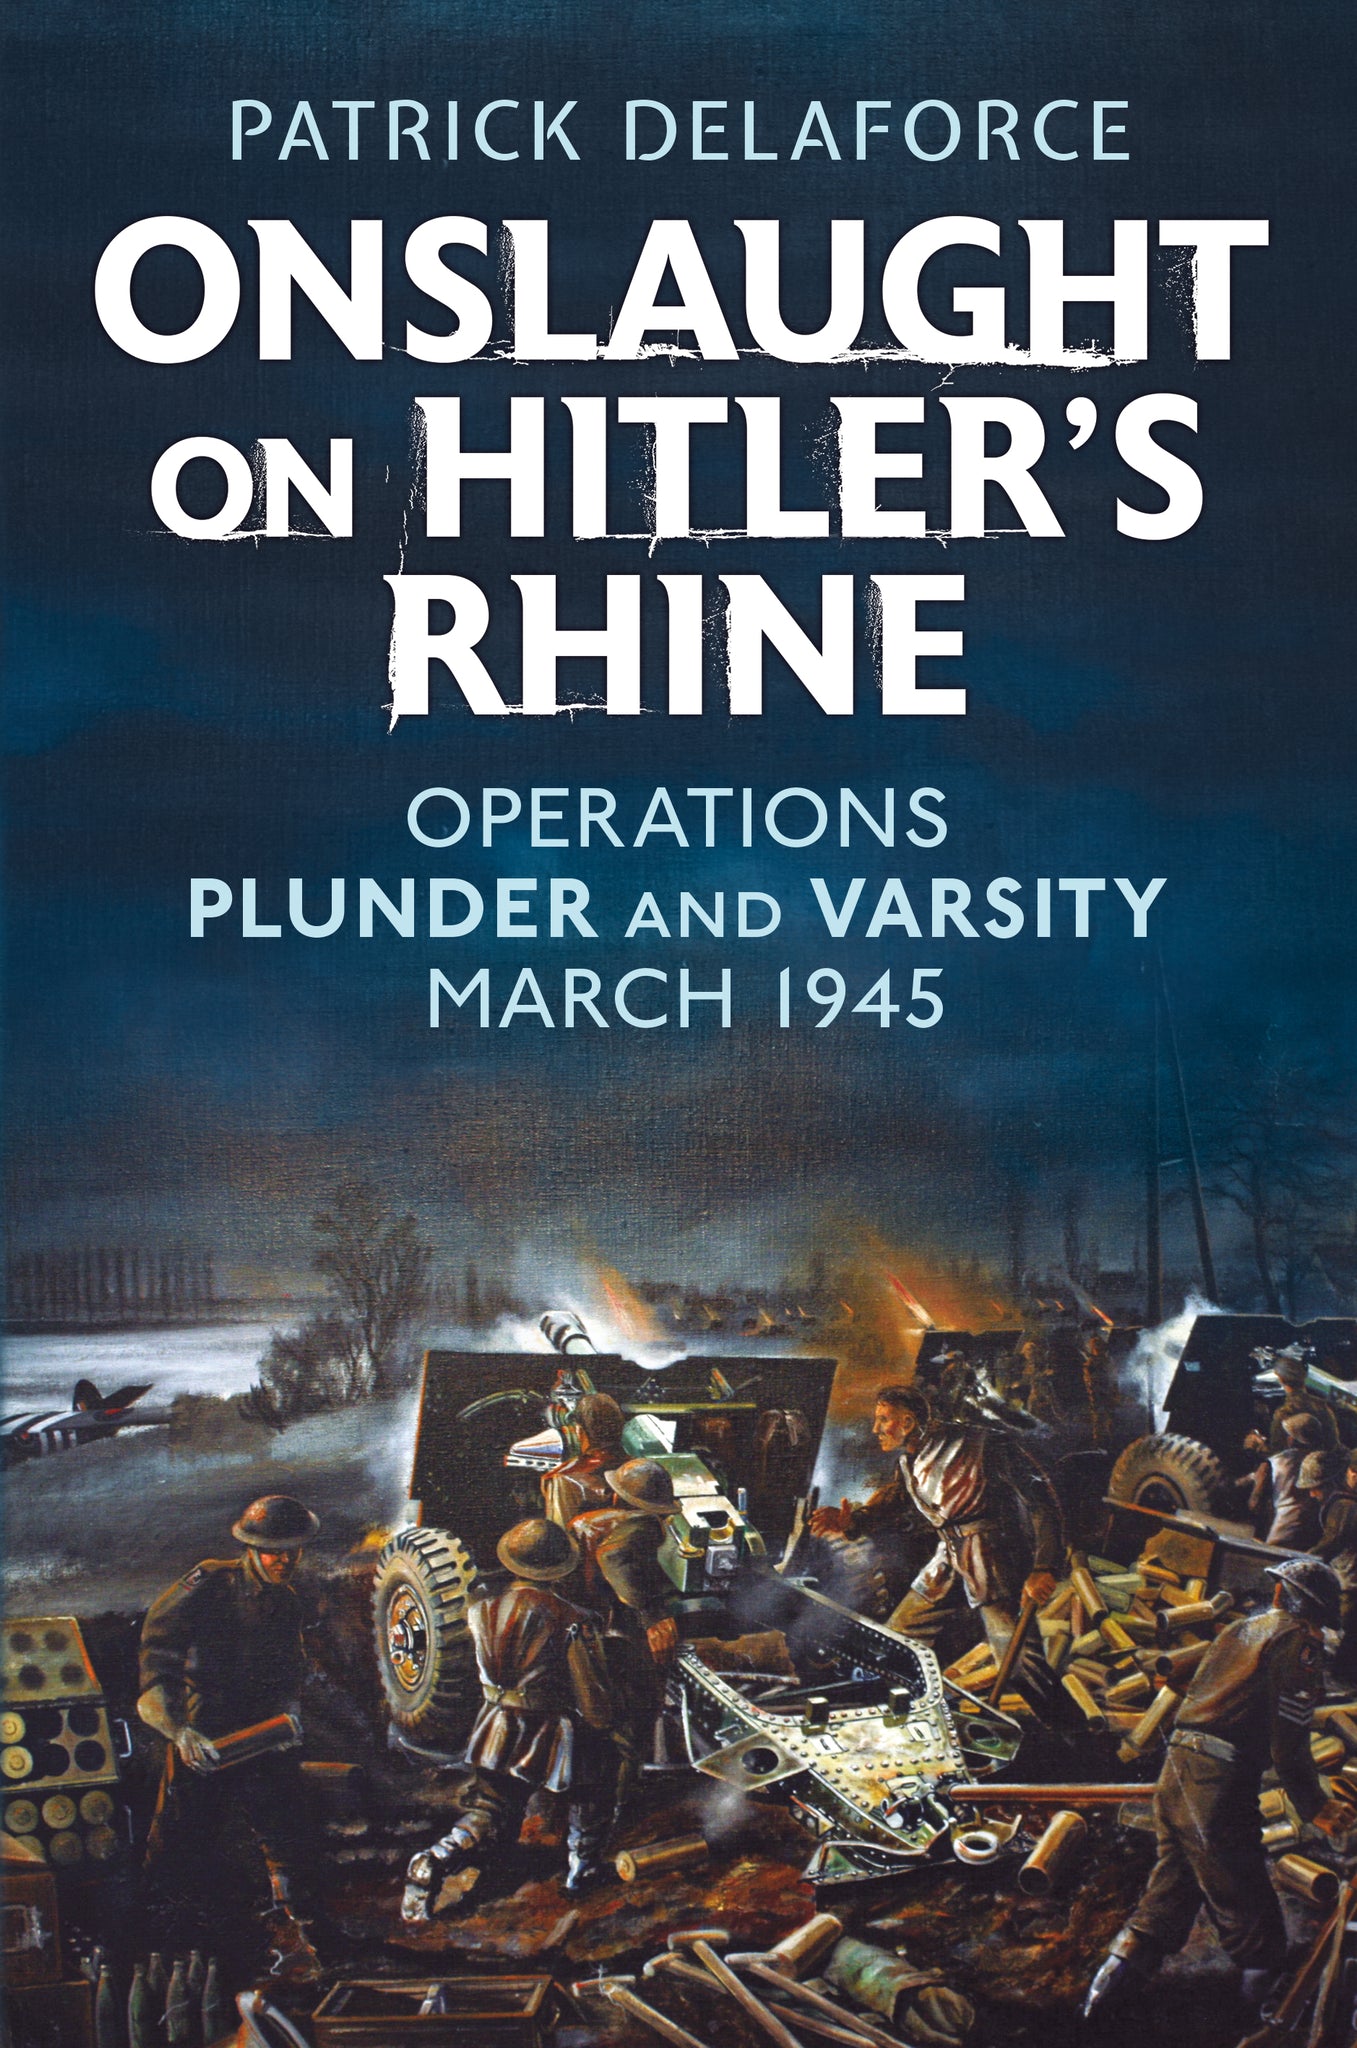 Onslaught on Hitler's Rhine: Operations Plunder and Varsity, March 1945